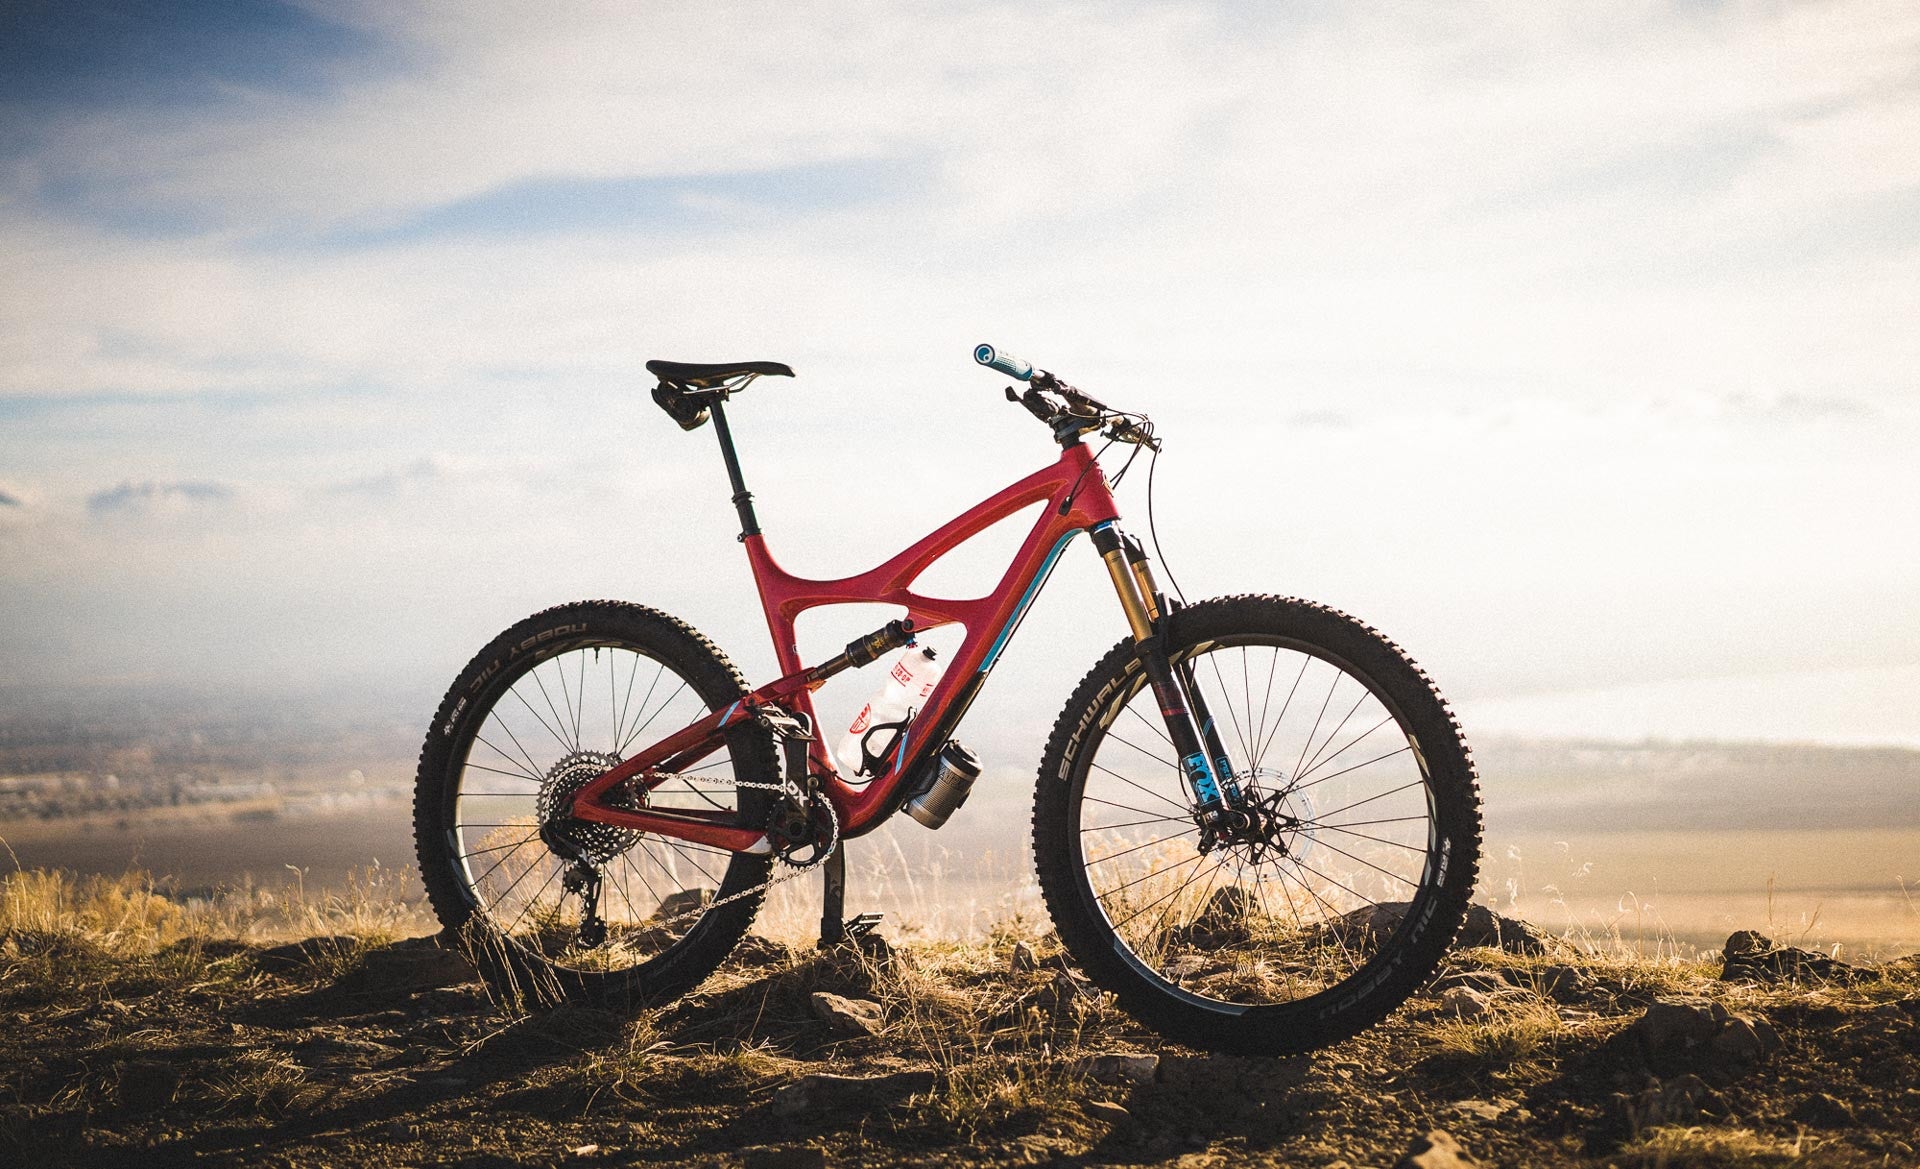 A red race car of a mountain bike